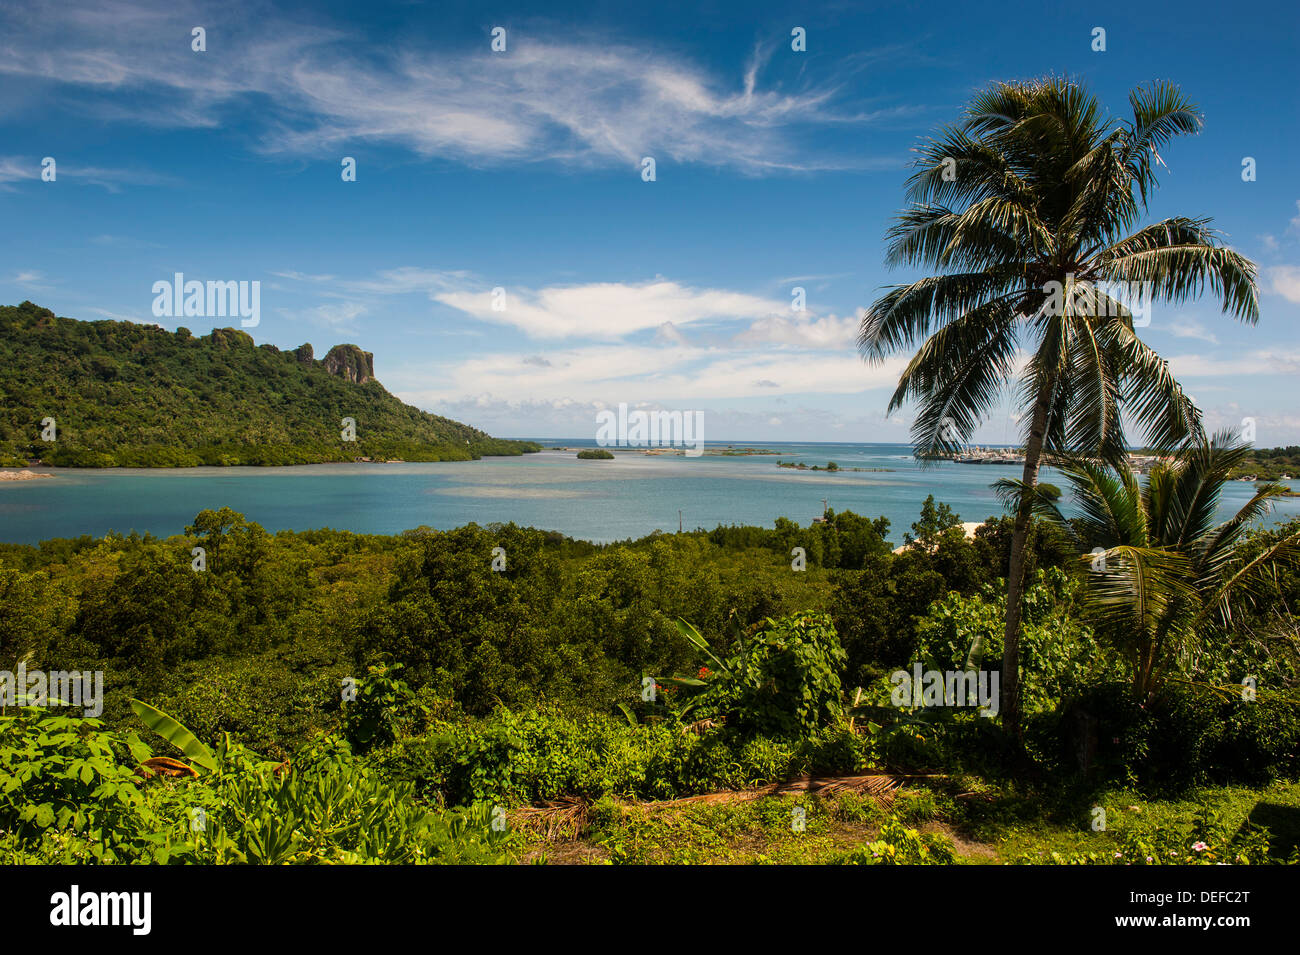 Lonely palm tree, Pohnpei (Ponape), Federated States of Micronesia, Caroline Islands, Central Pacific, Pacific Stock Photo